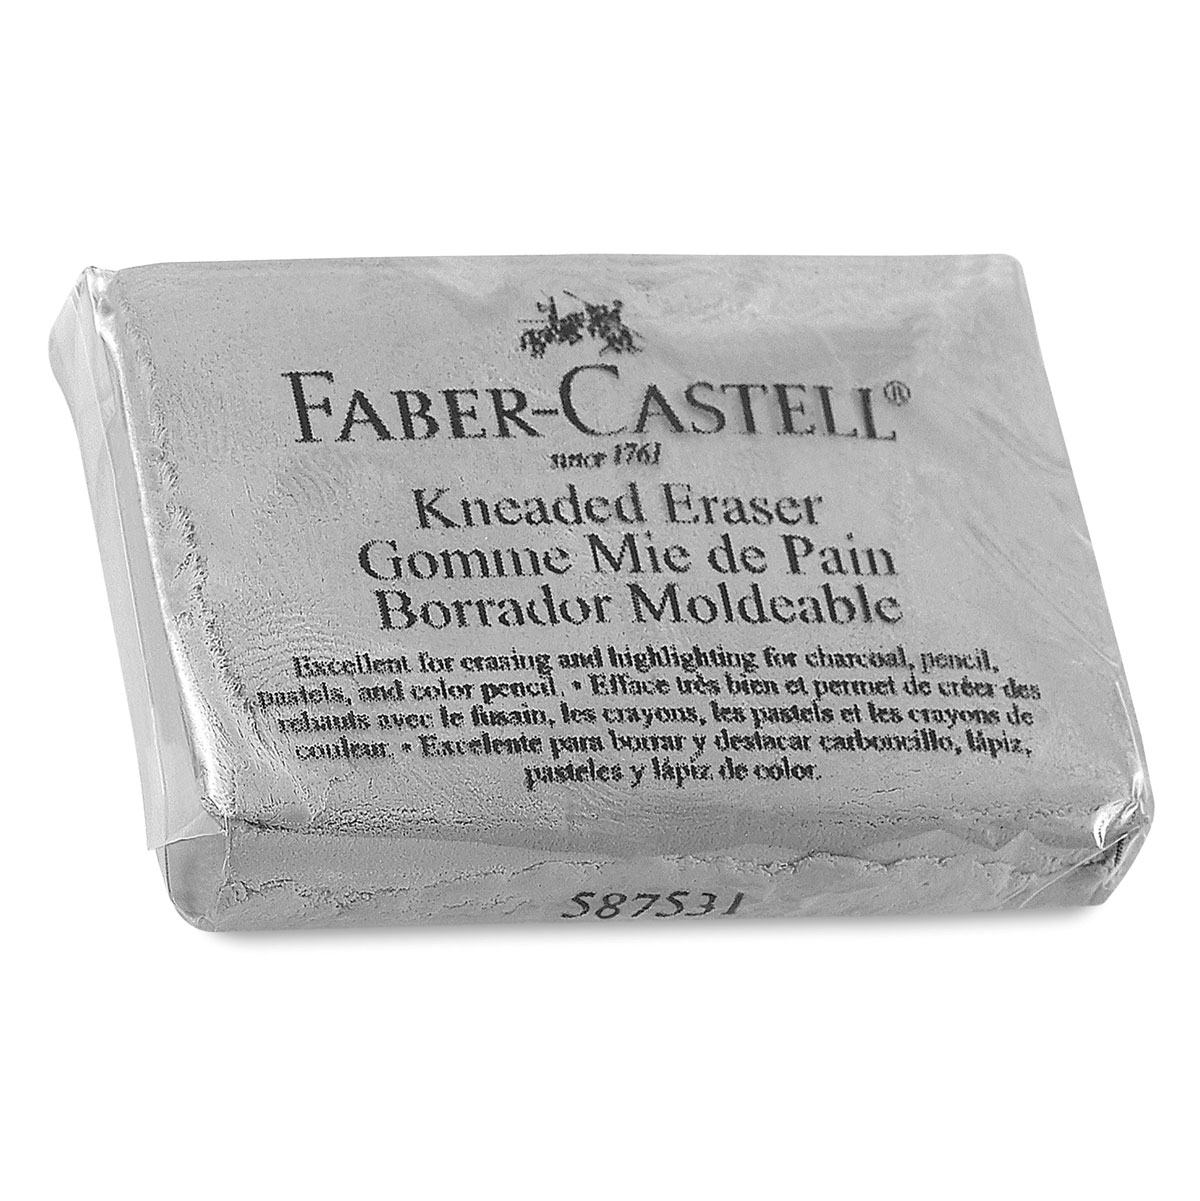 Faber-Castell Kneaded Erasers, Assorted Colors - Blue/Red/Yellow